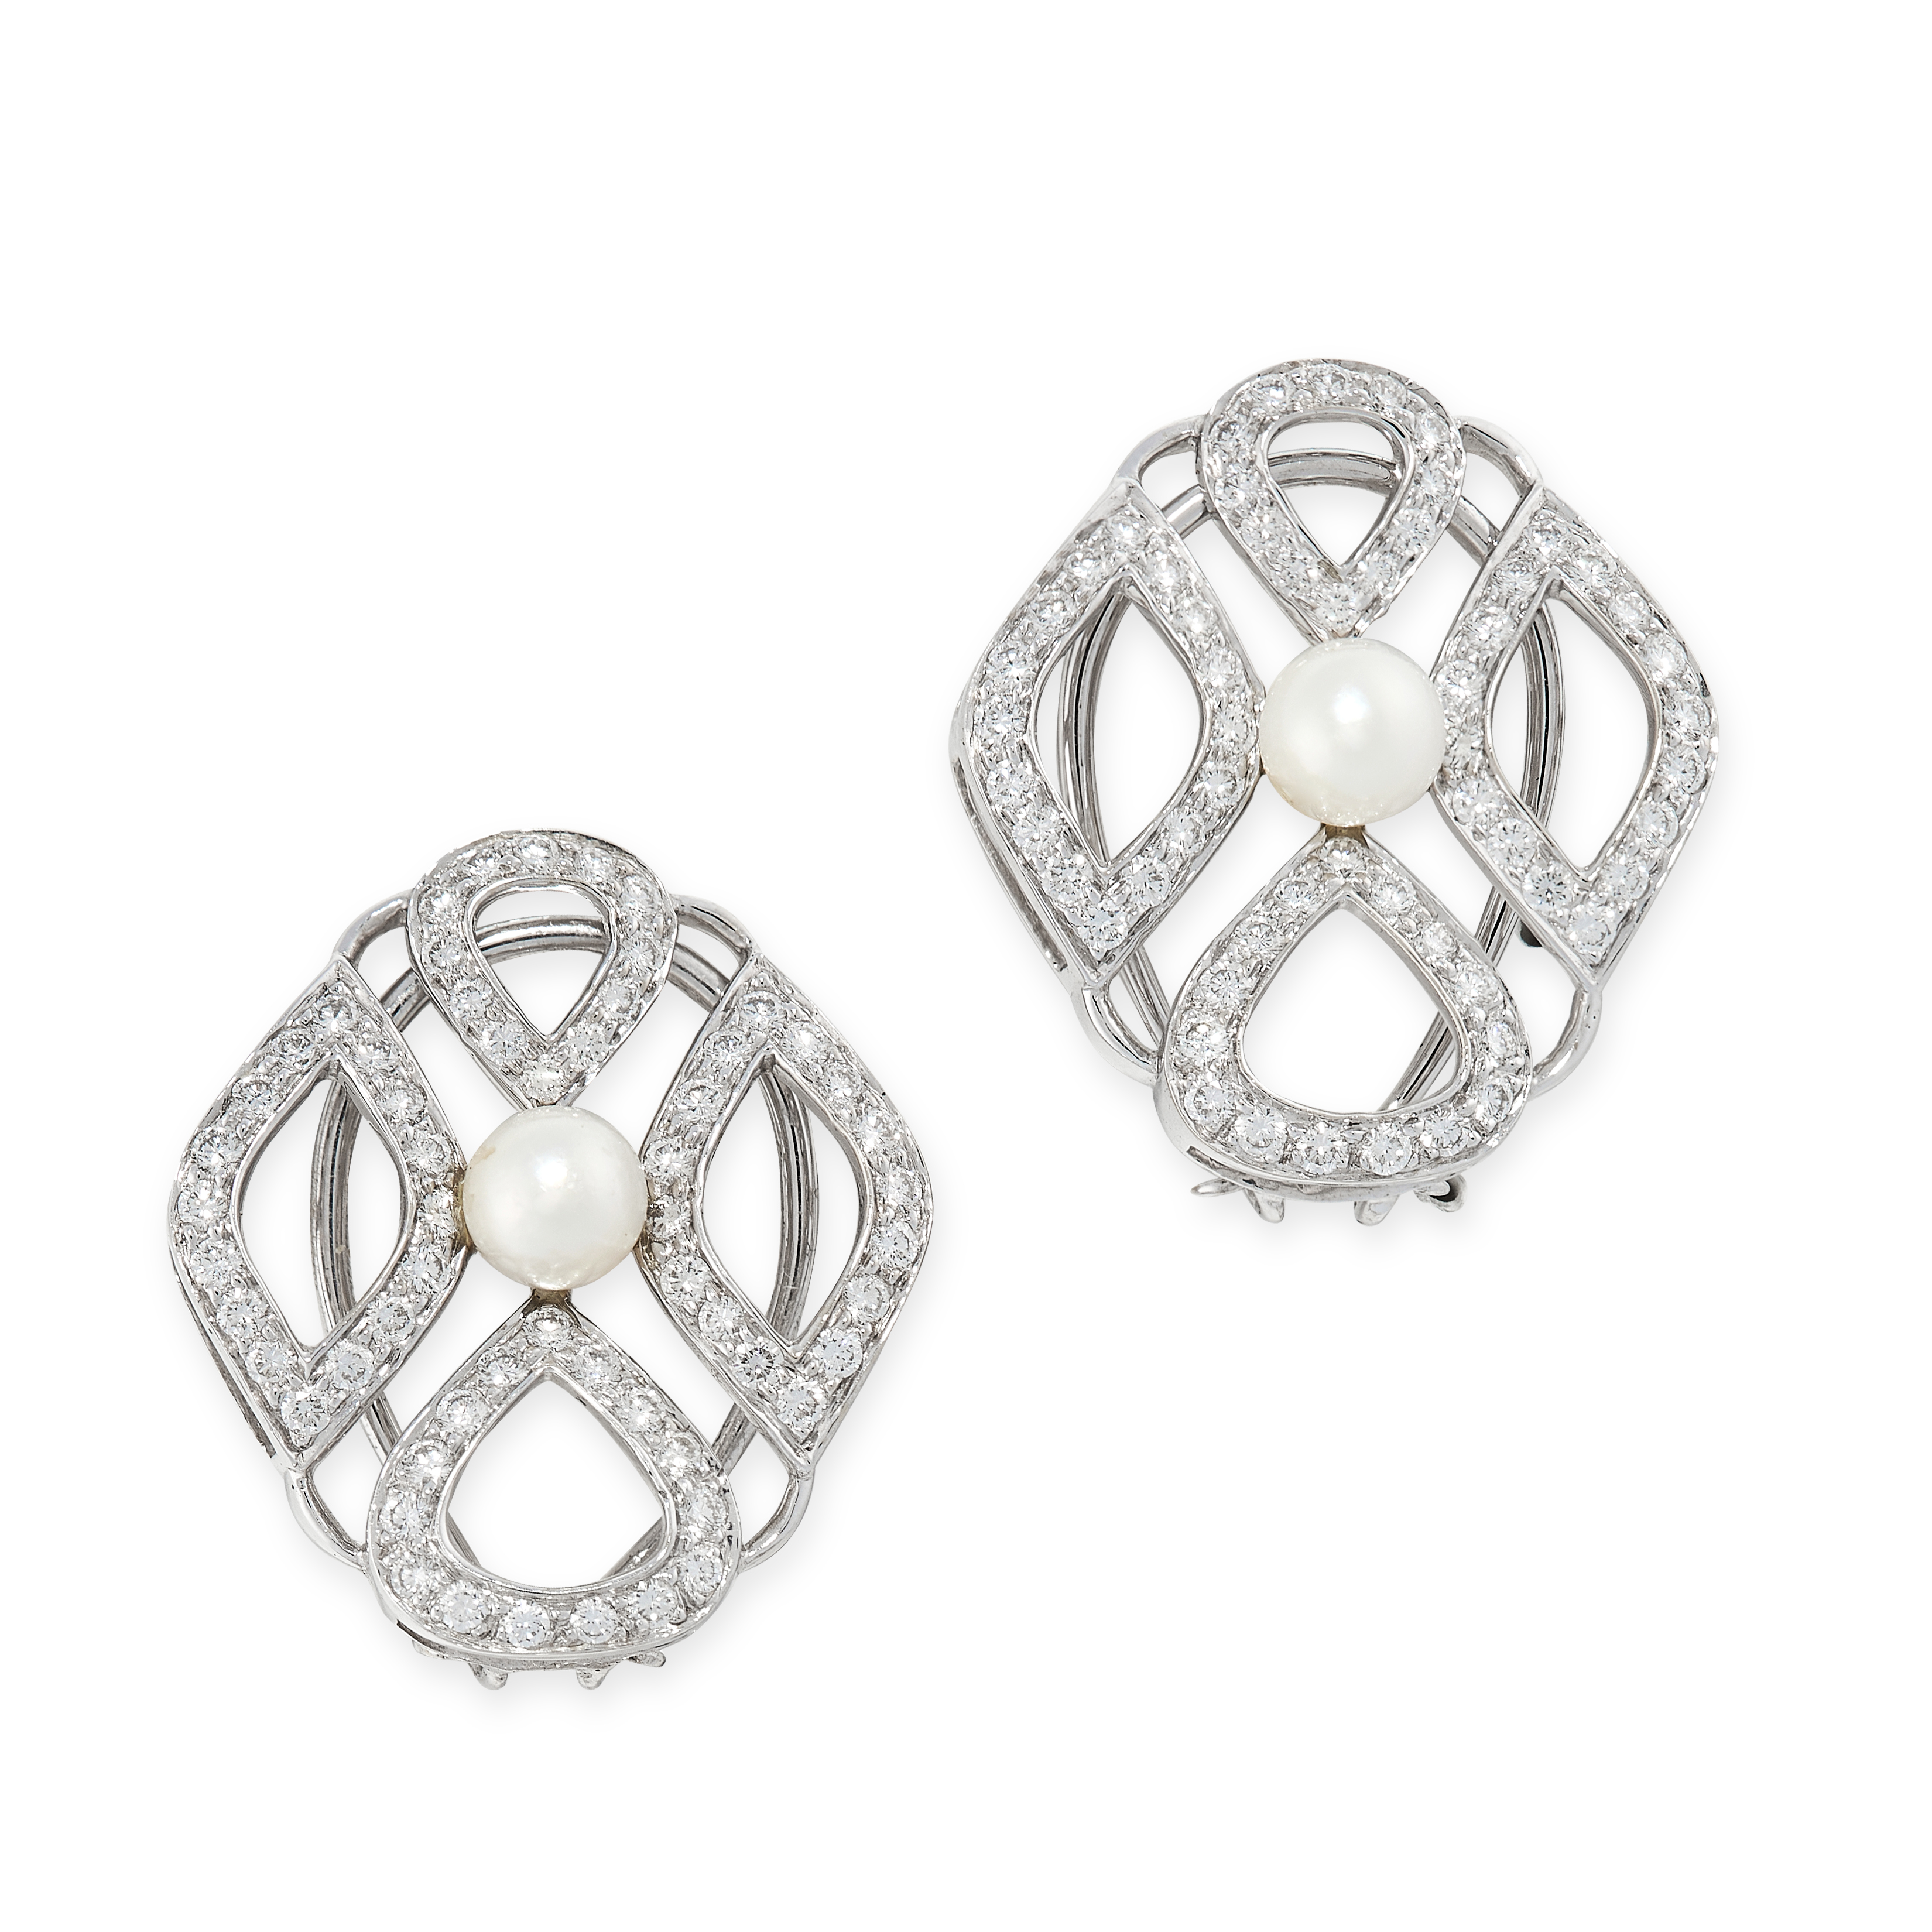 A PAIR OF PEARL AND DIAMOND EARRINGS in 18ct white gold, each set with a pearl within openwork